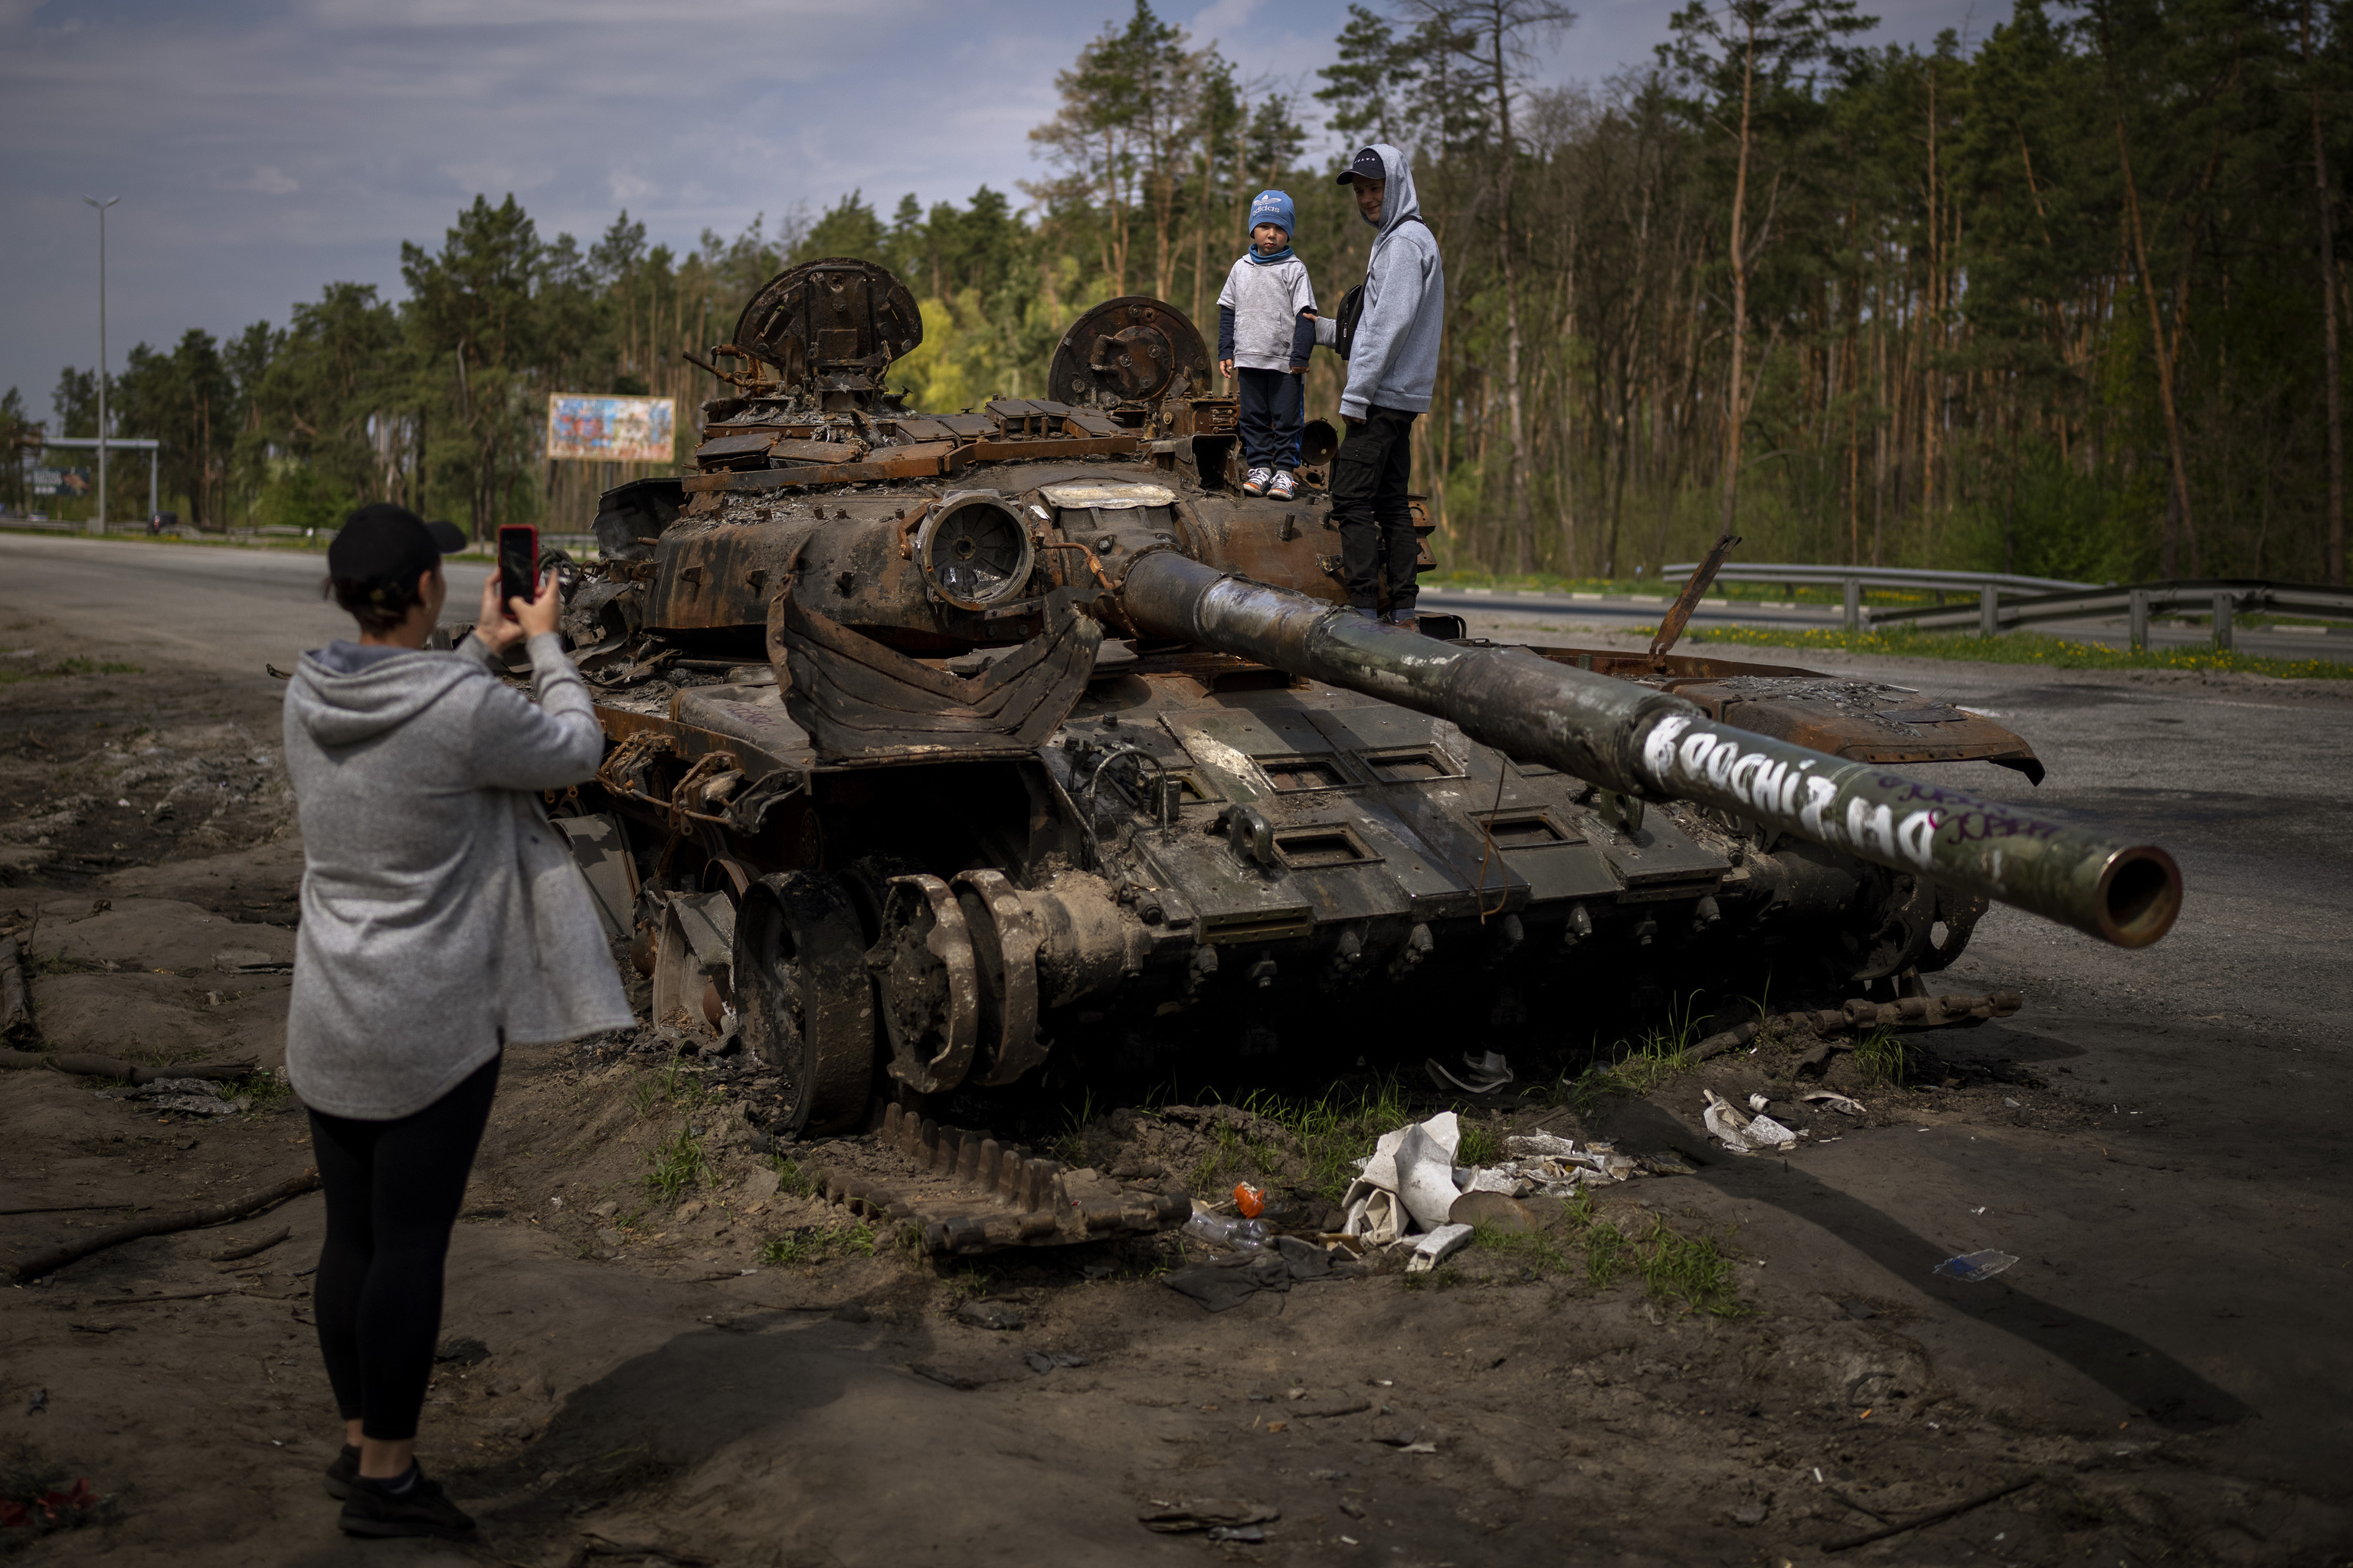 Two brothers take a picture in a destroyed Russian tank near Kyiv.